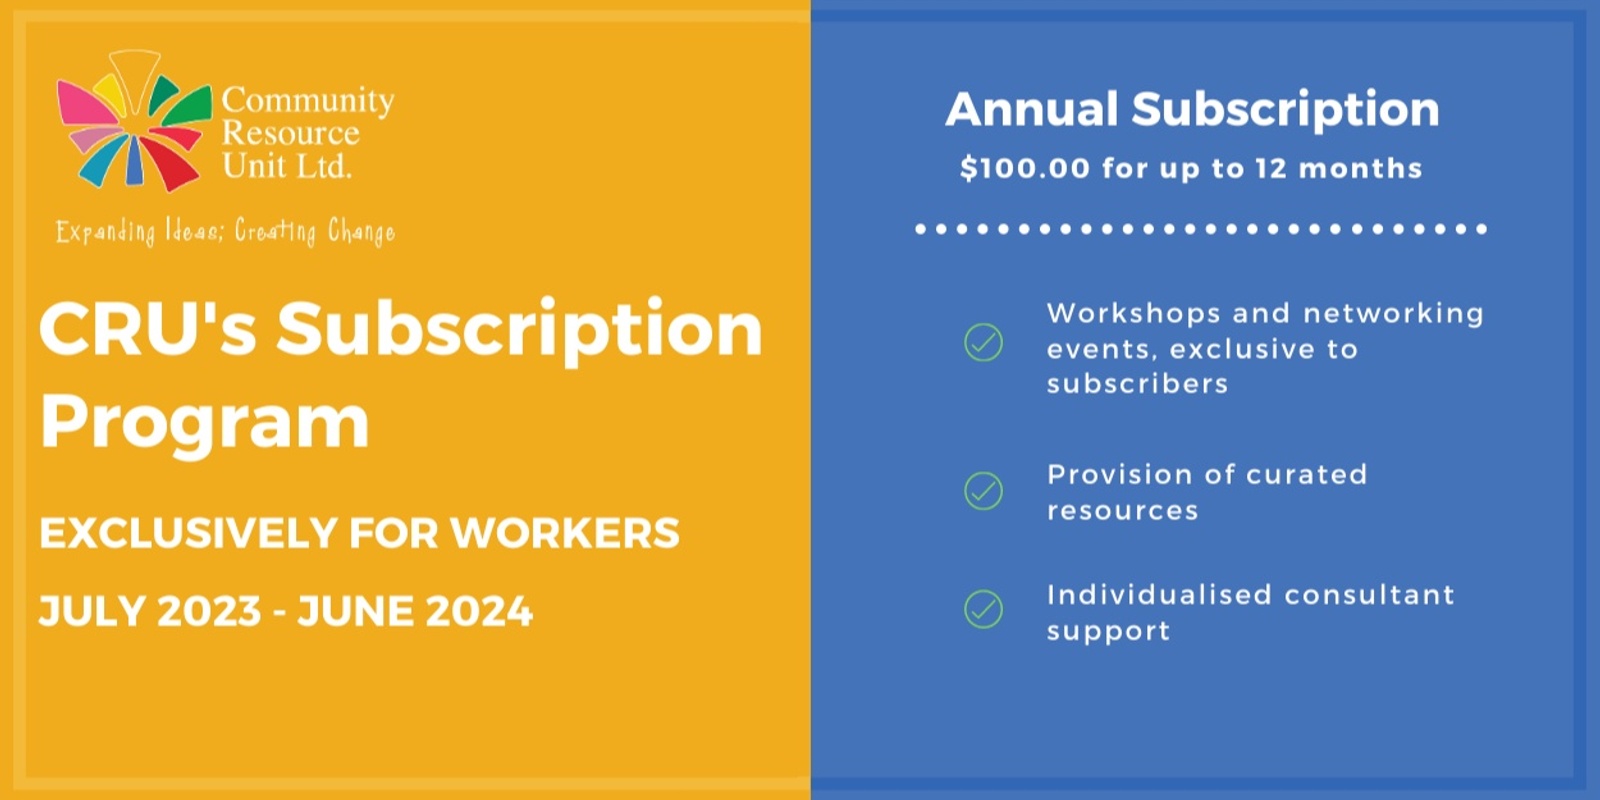 CRU Subscription Program for Workers (July 2023 - June 2024)